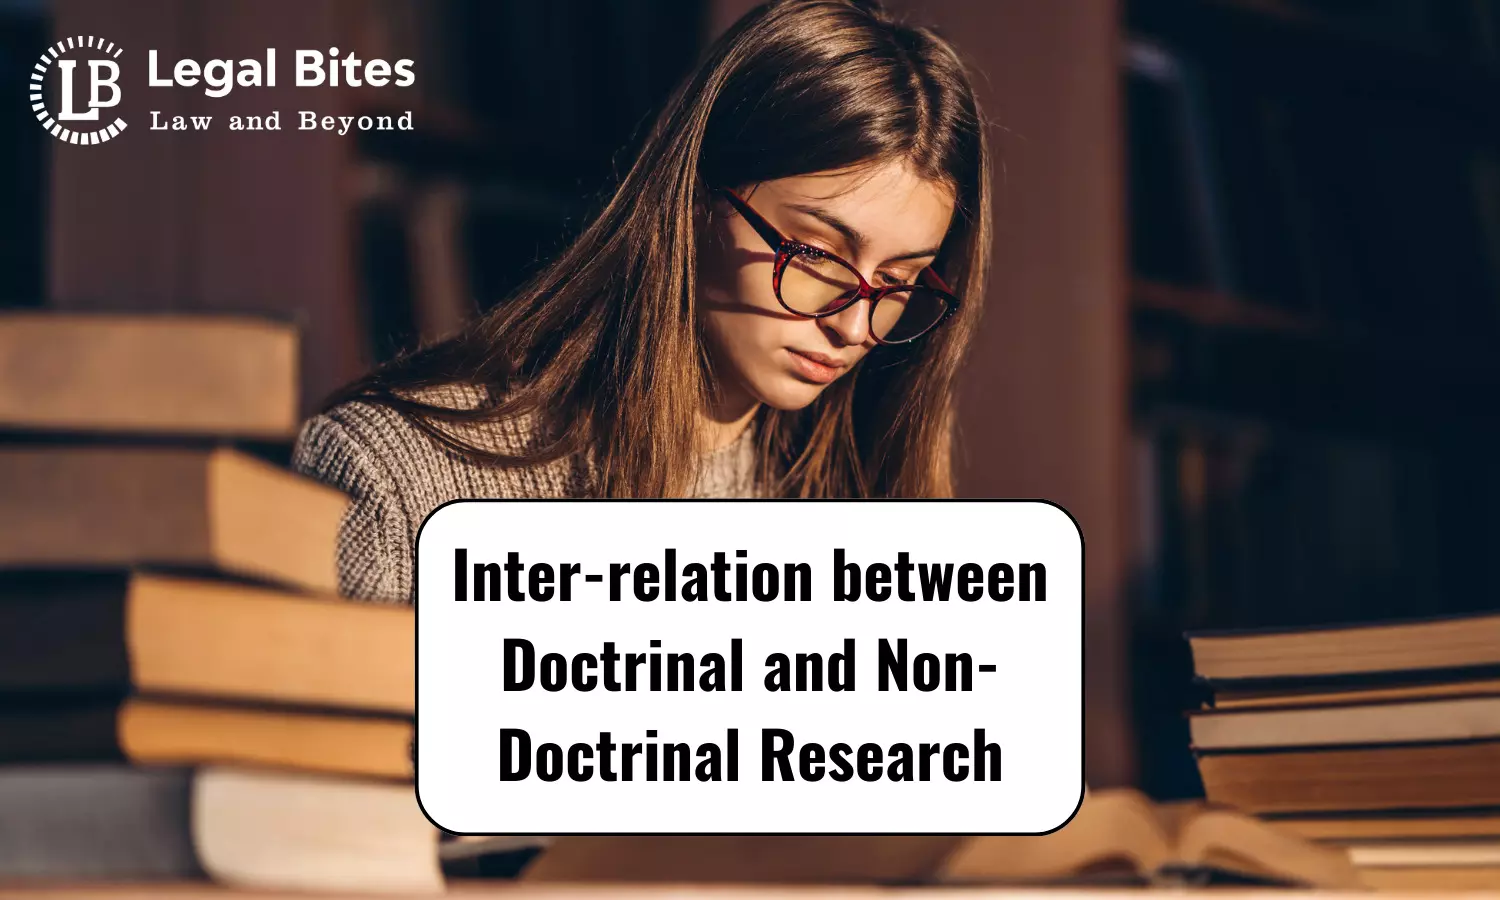 Inter-relation between Doctrinal and Non-Doctrinal Research